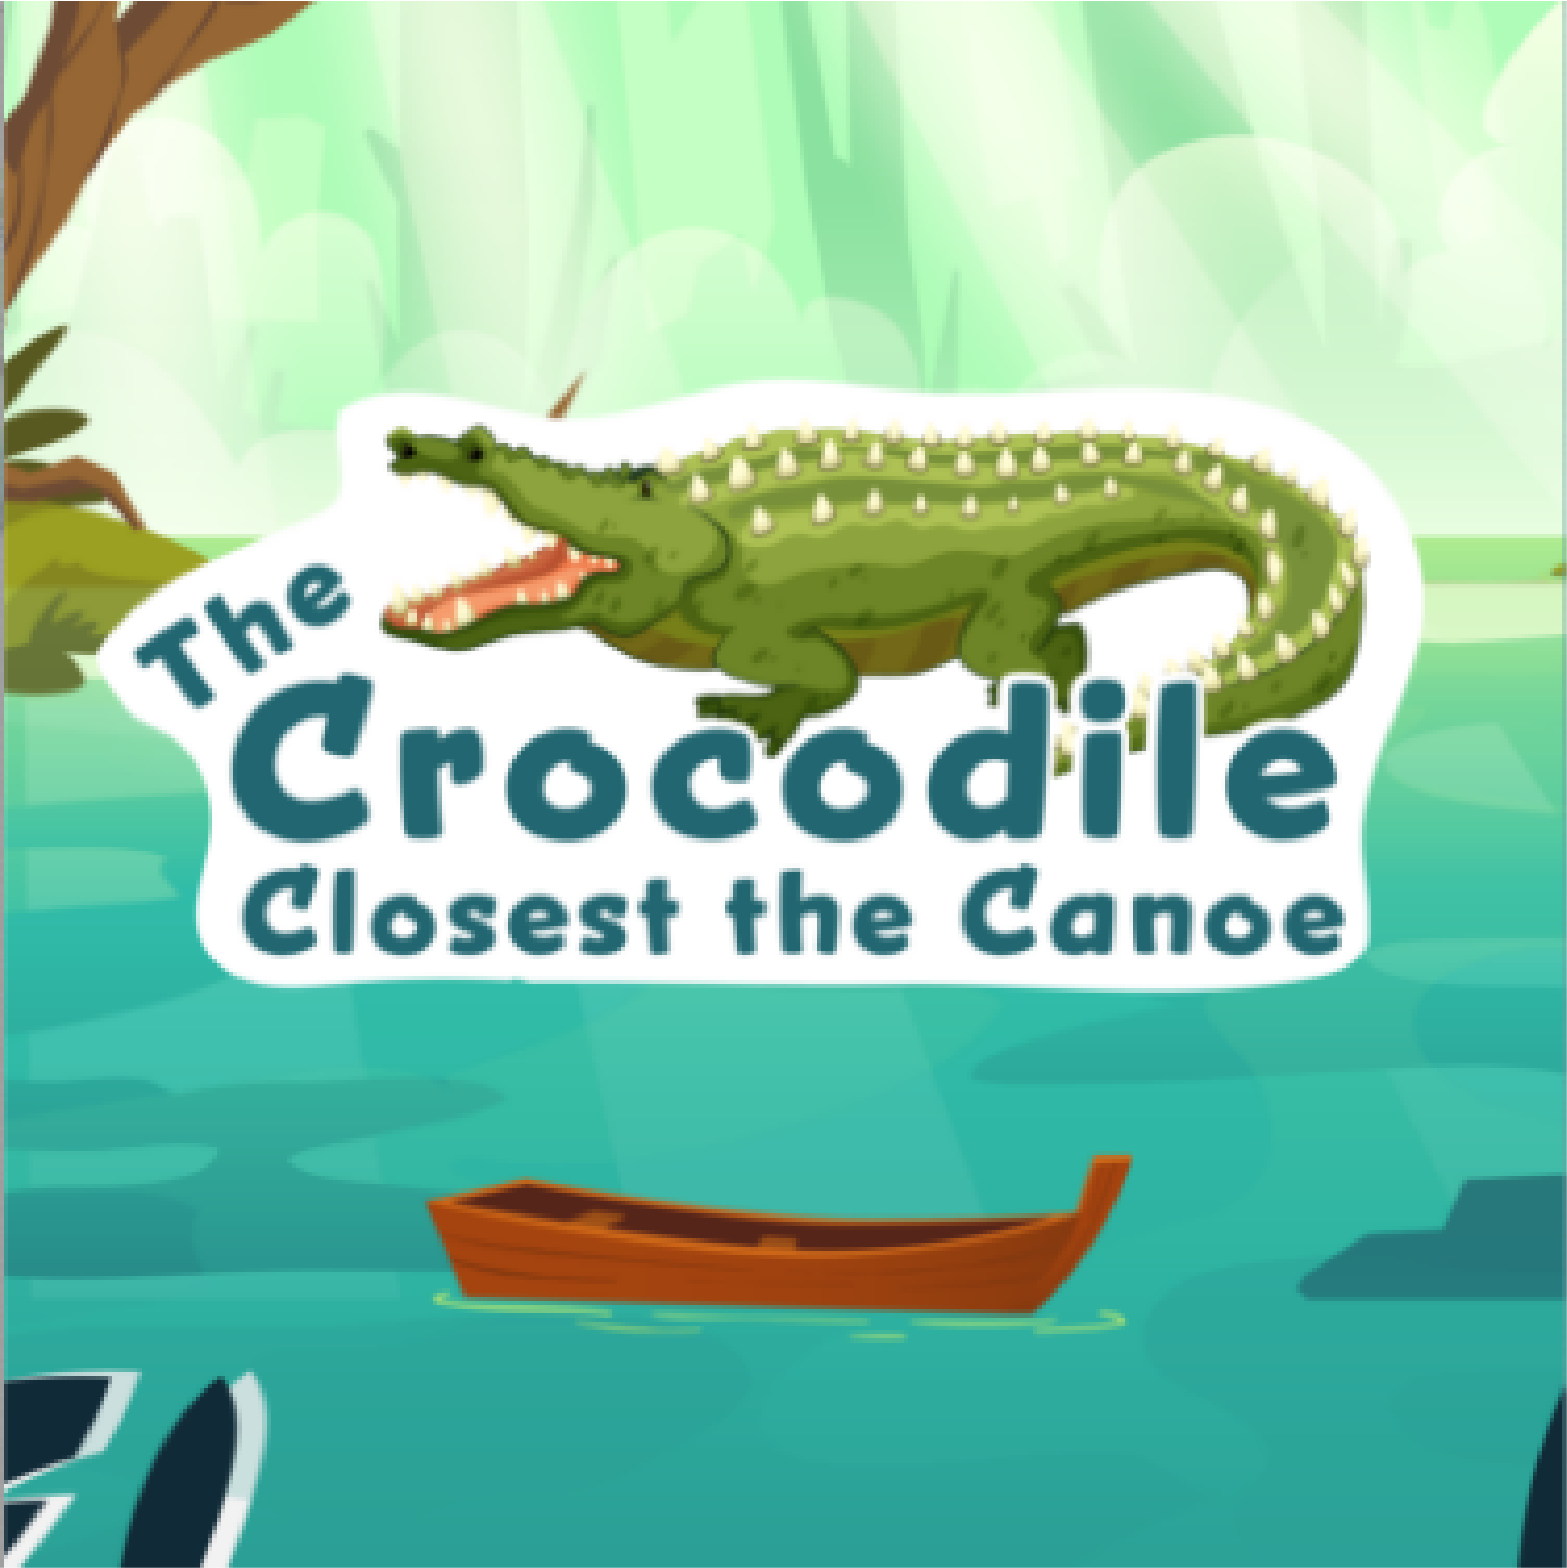 Link to Crocodile Closest to the Boat App